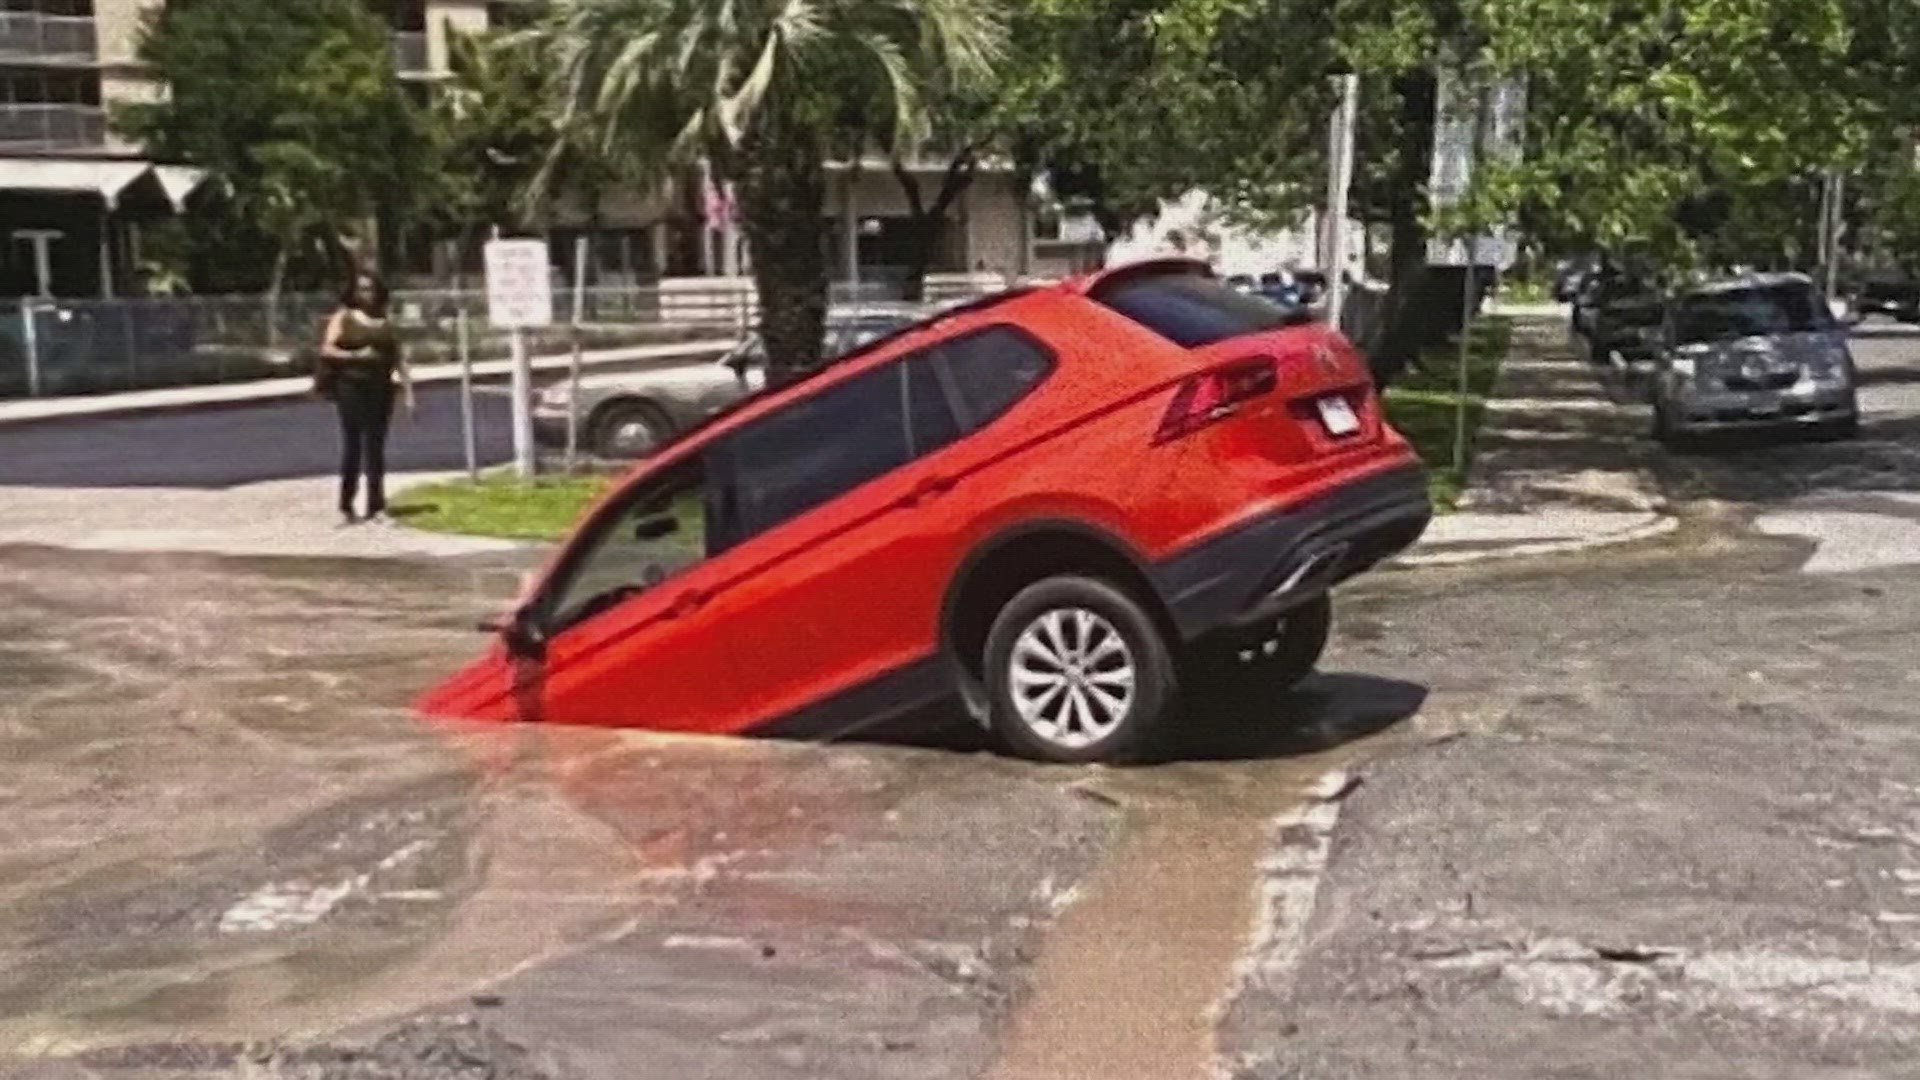 John King was doing his routine run to the market when the front end of his SUV was suddenly devoured by what he thought was a shallow puddle.